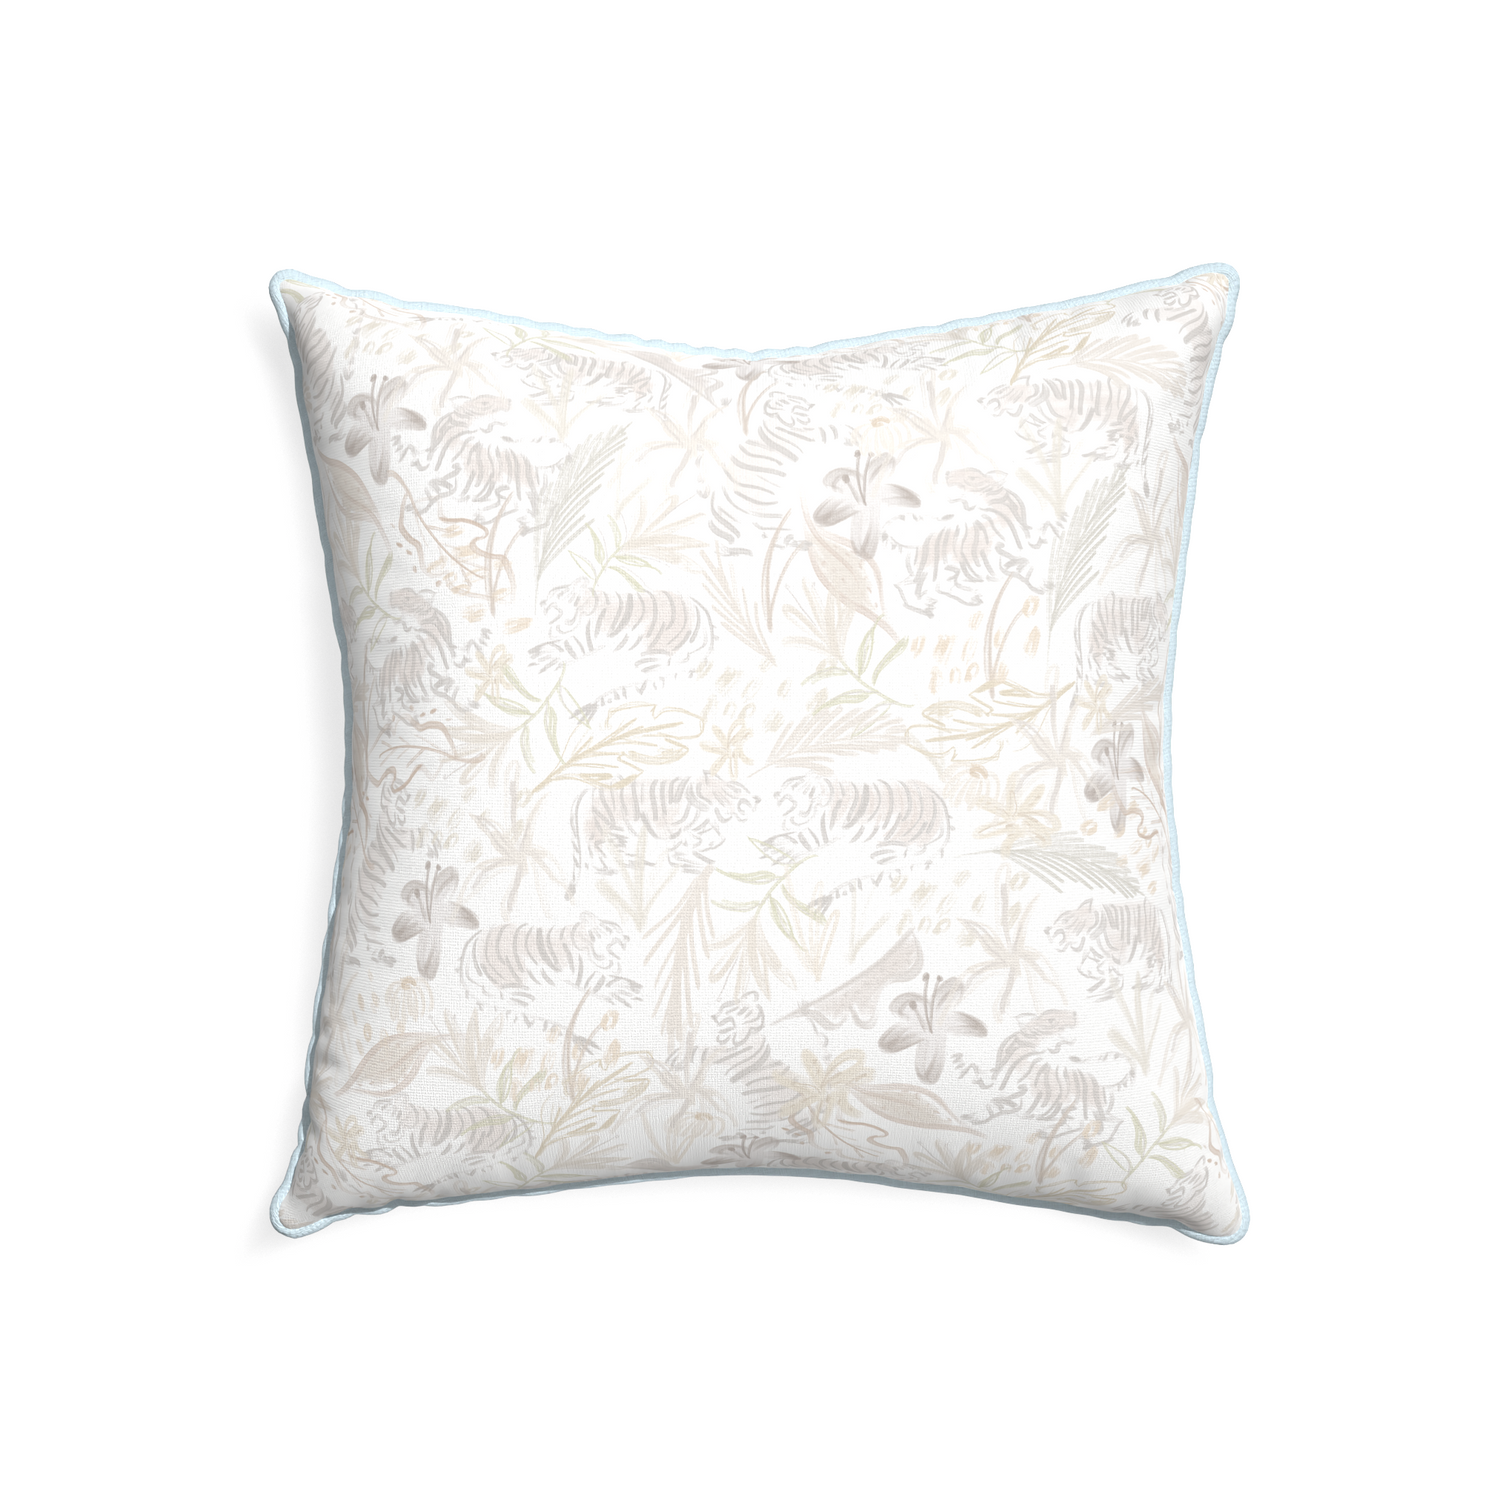 22-square frida sand custom beige chinoiserie tigerpillow with powder piping on white background